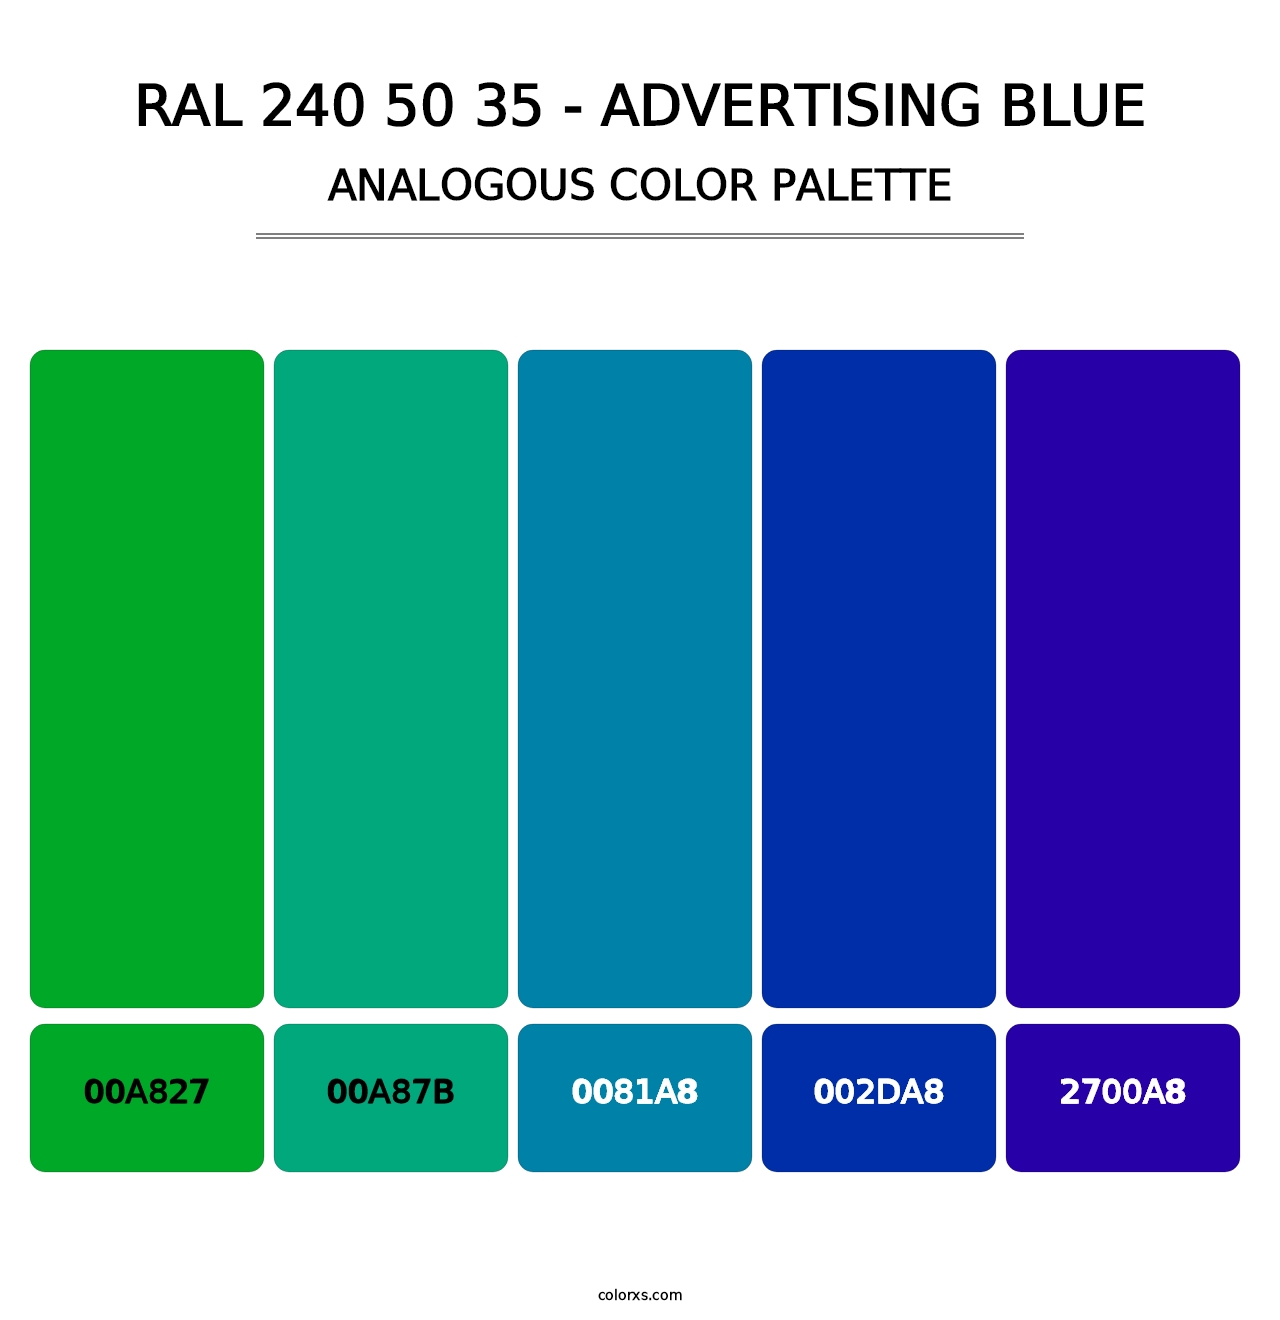 RAL 240 50 35 - Advertising Blue - Analogous Color Palette